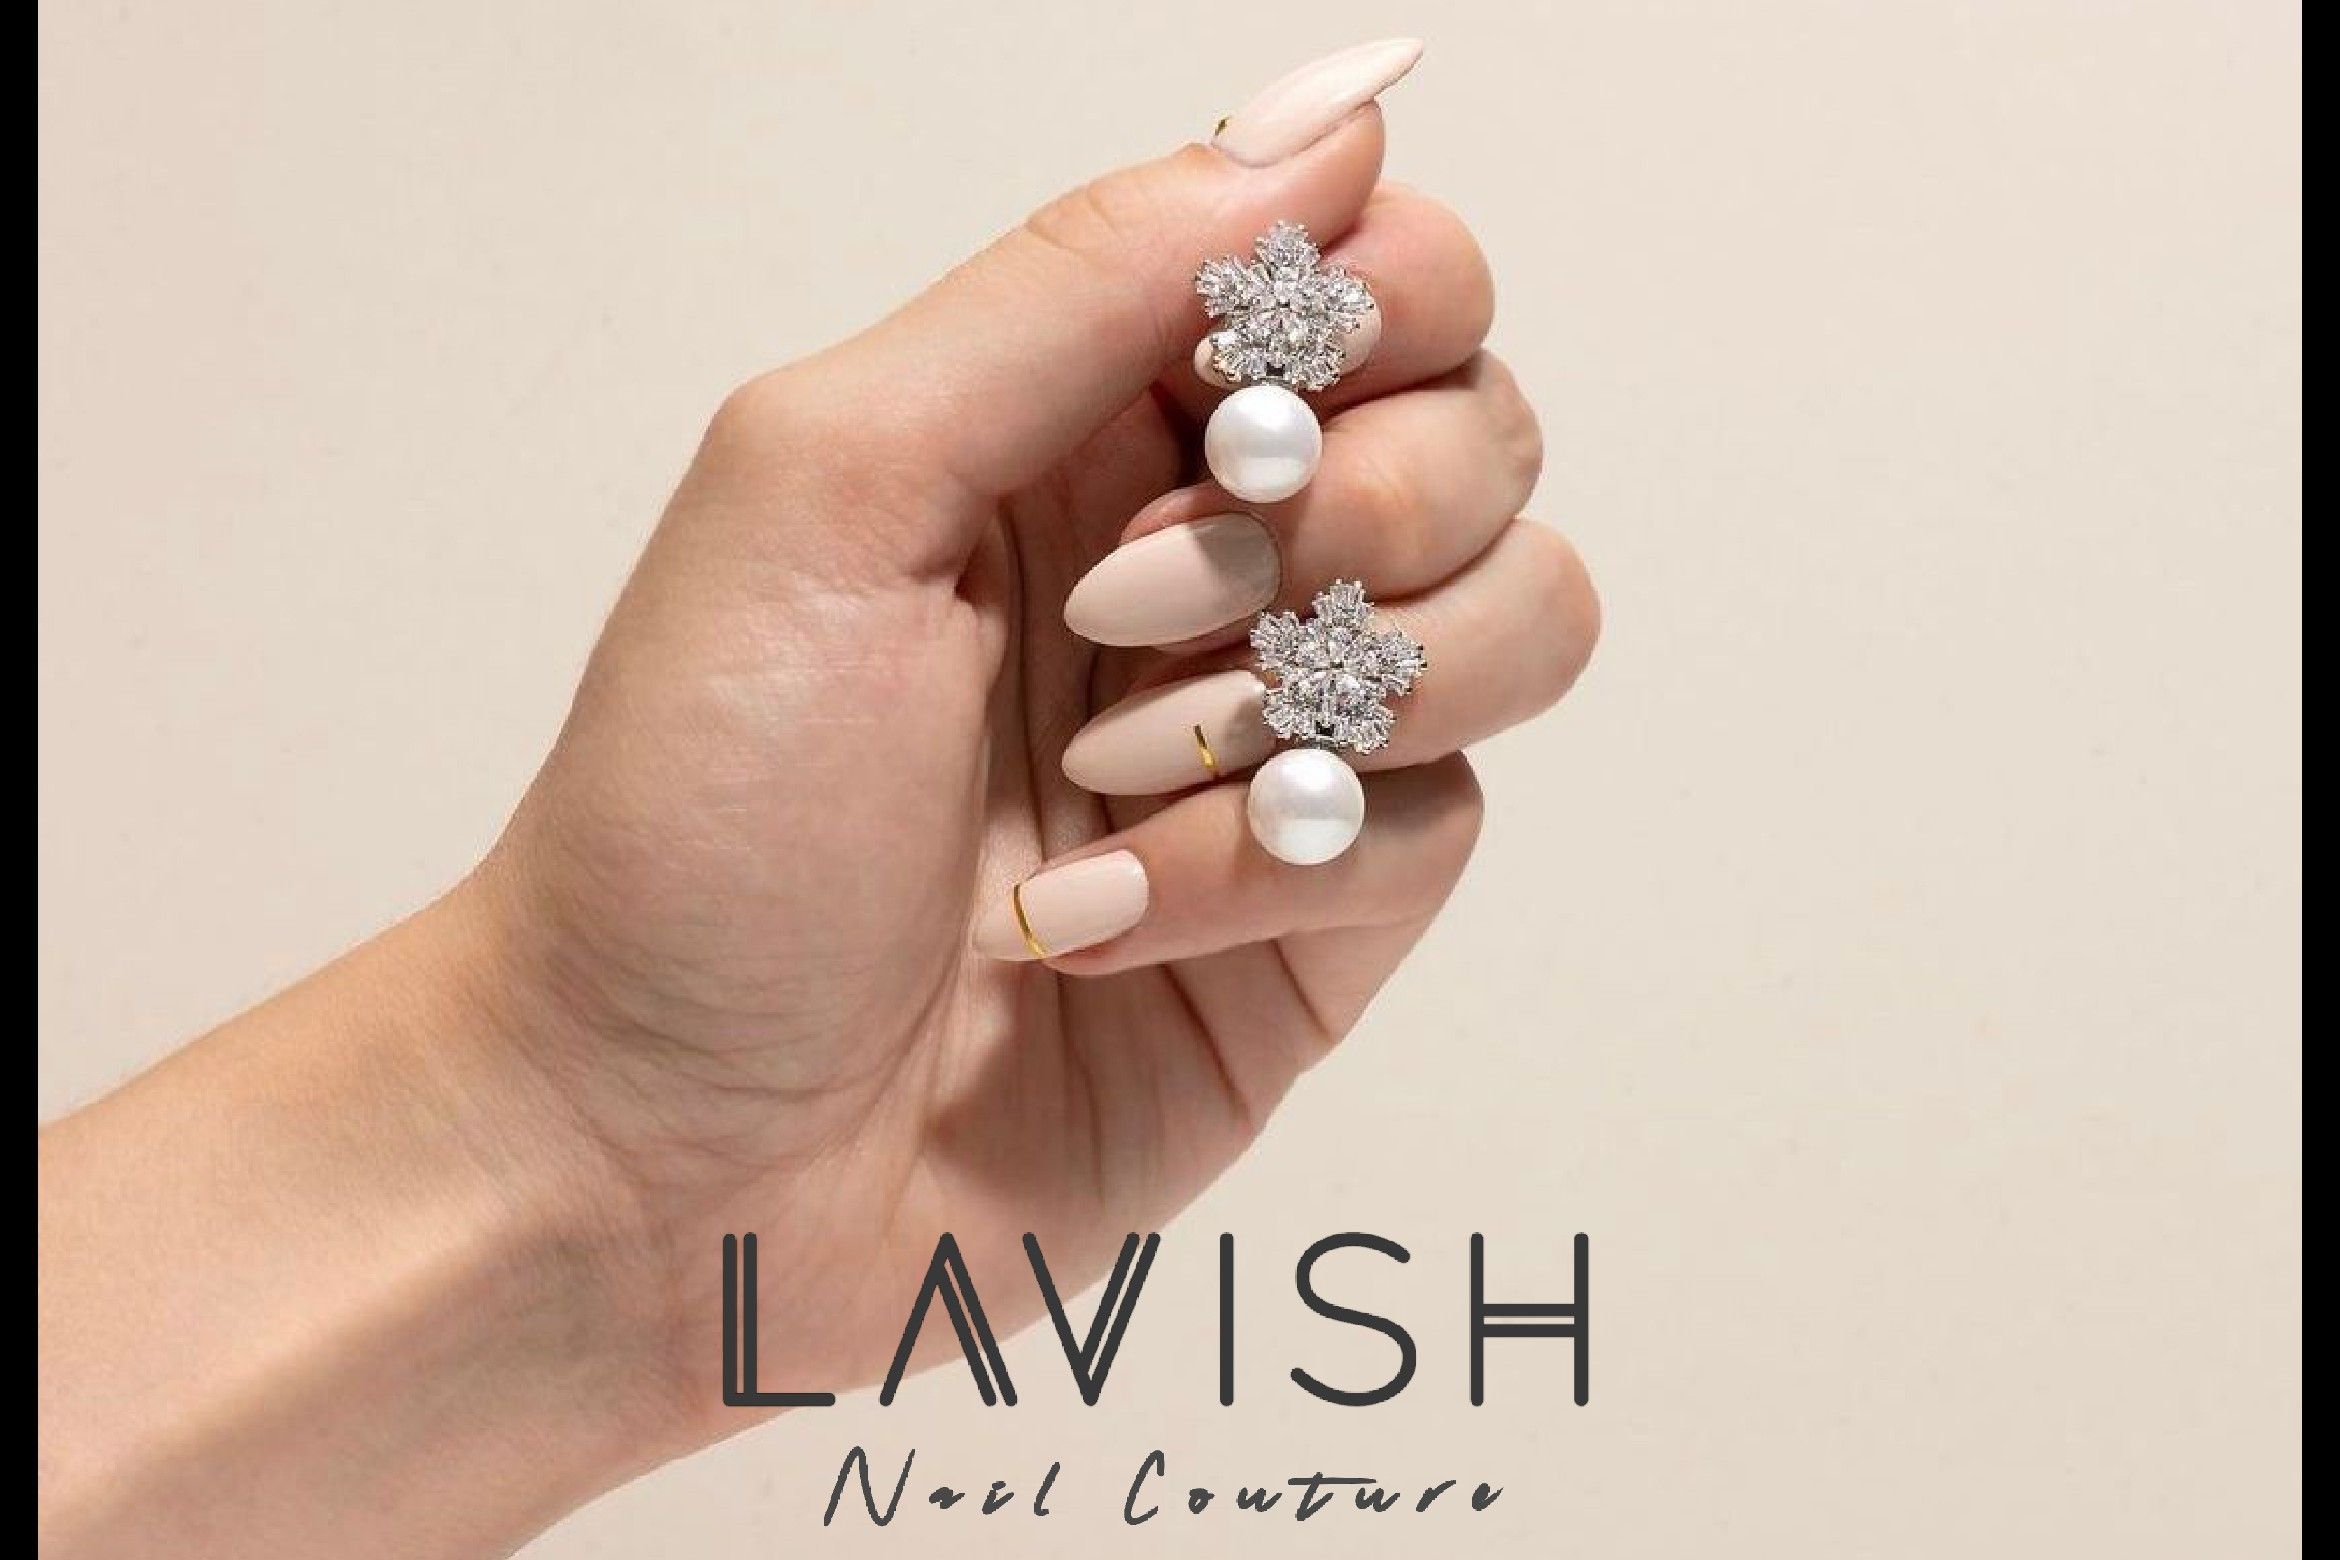 Lavish Nail Couture - Somerset West - Book Online - Prices